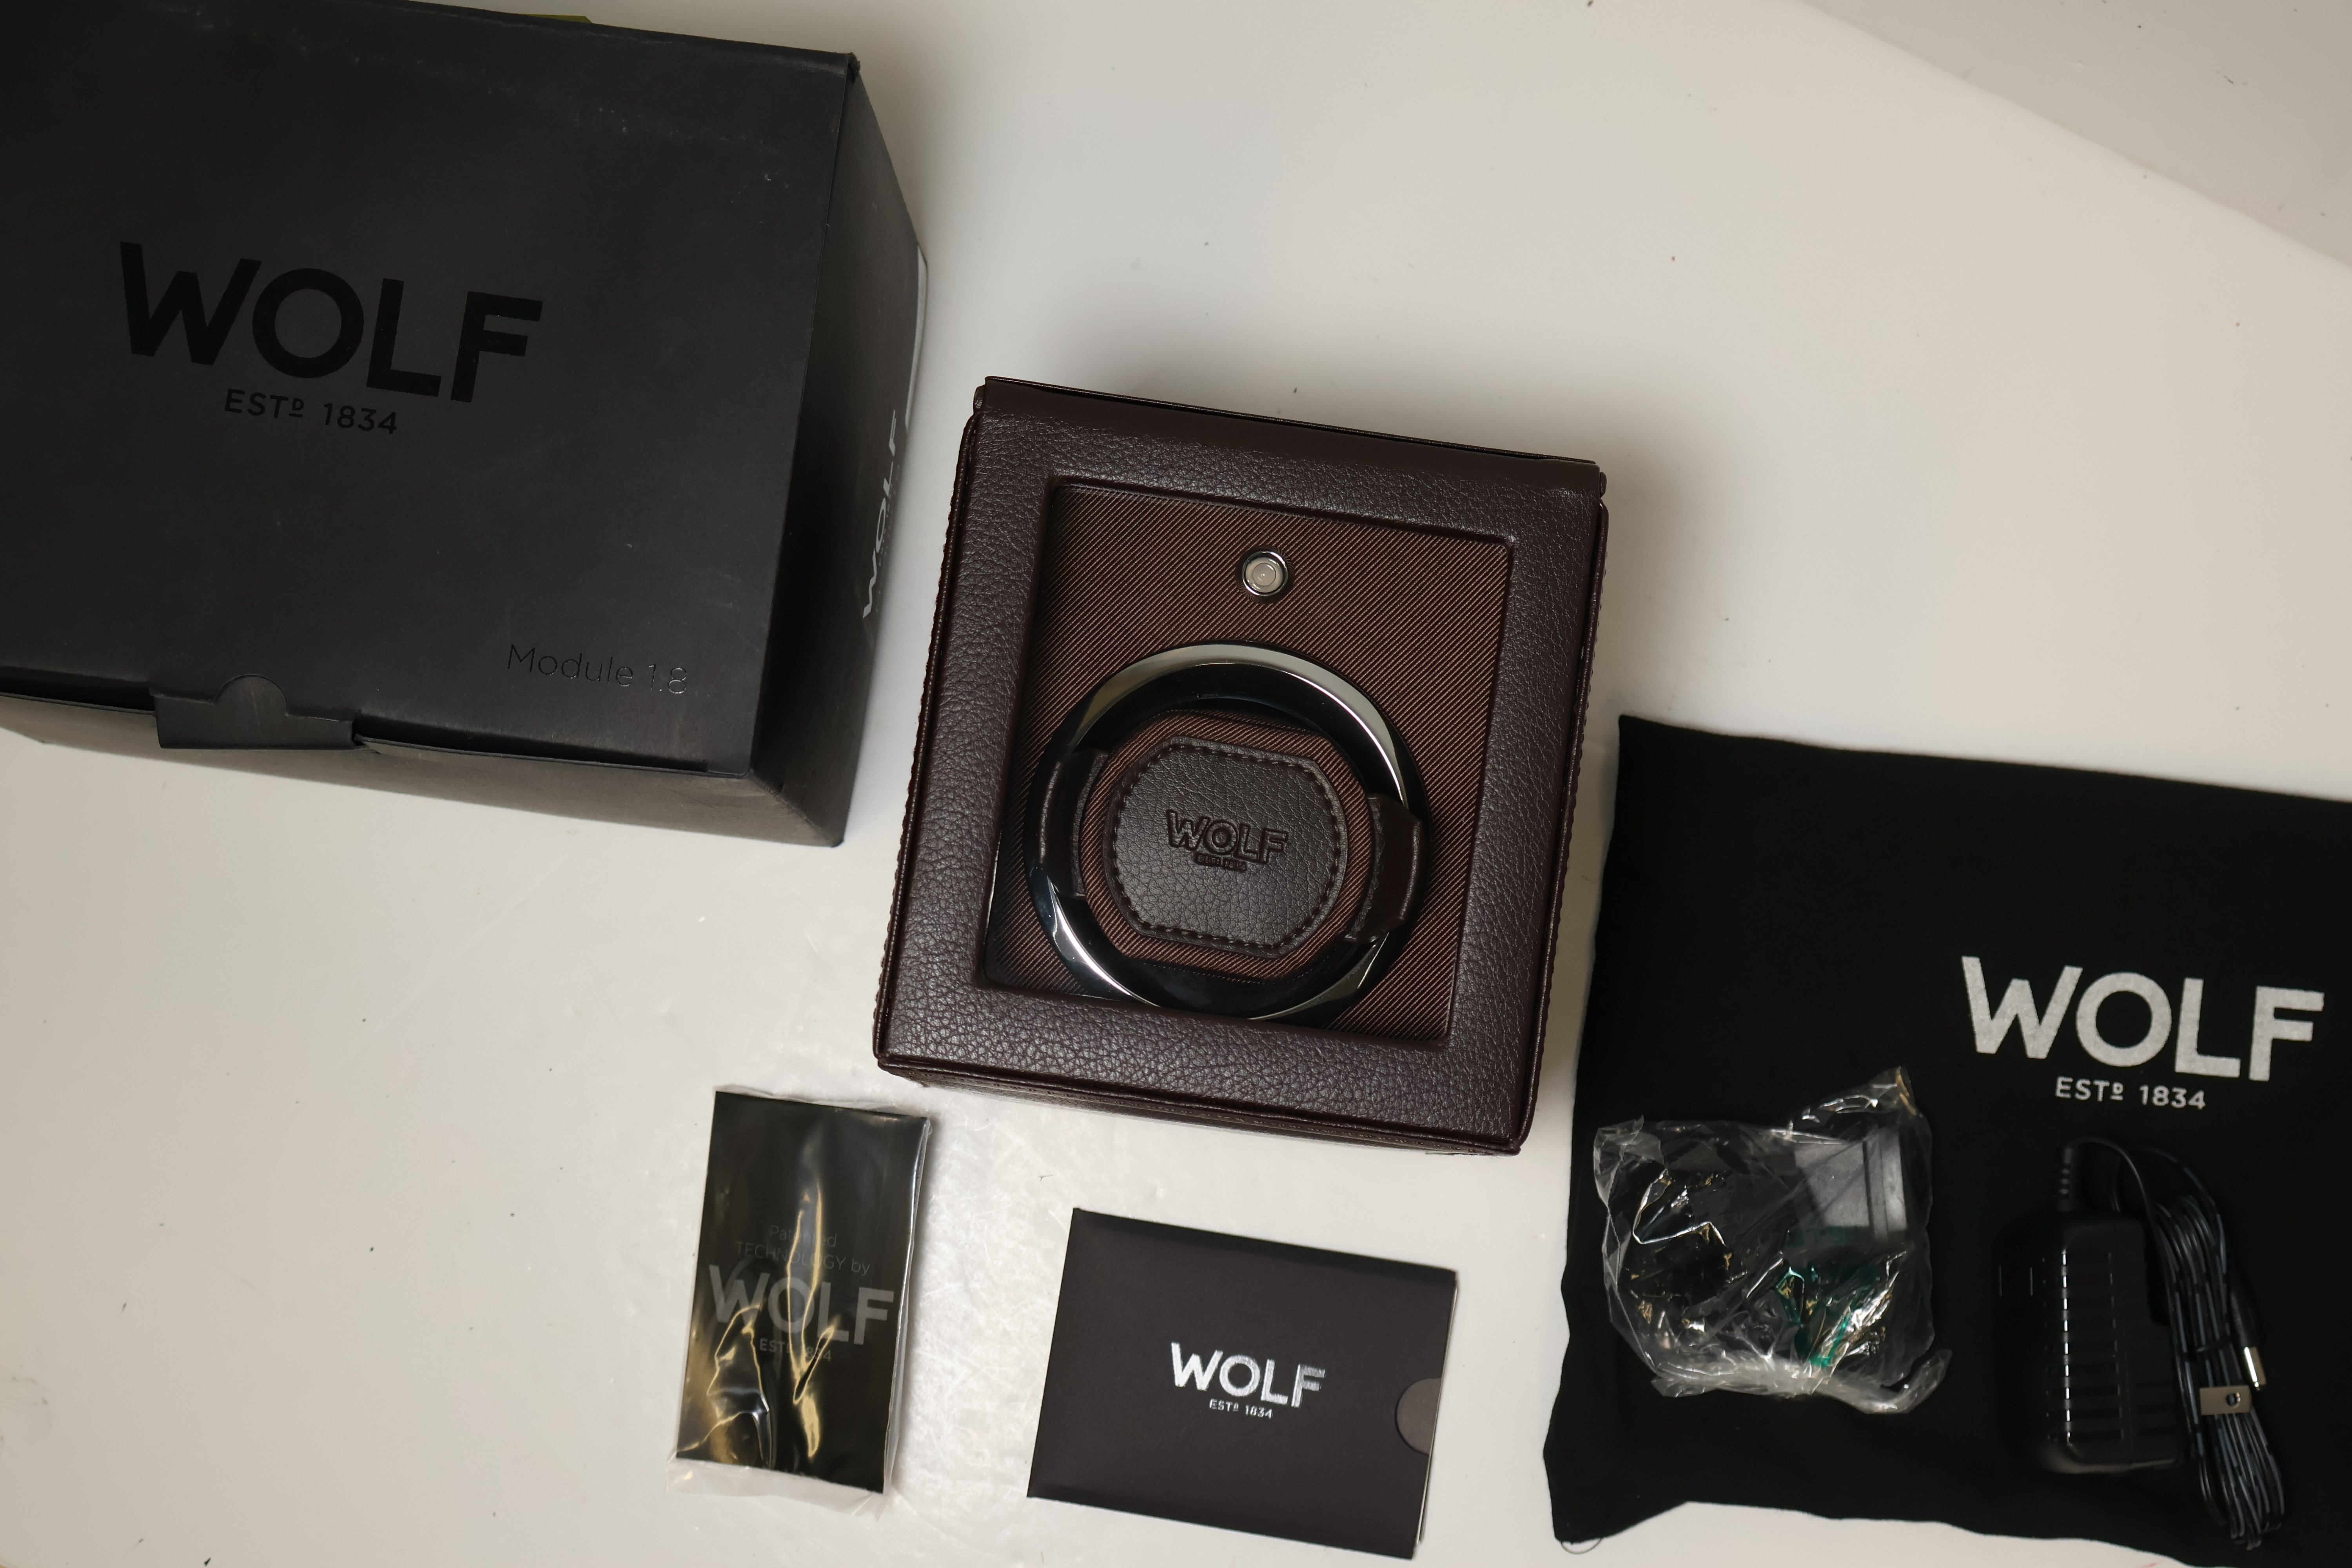 *To Be Sold Without Reserve* WOLF Watch winder box Module 1.8